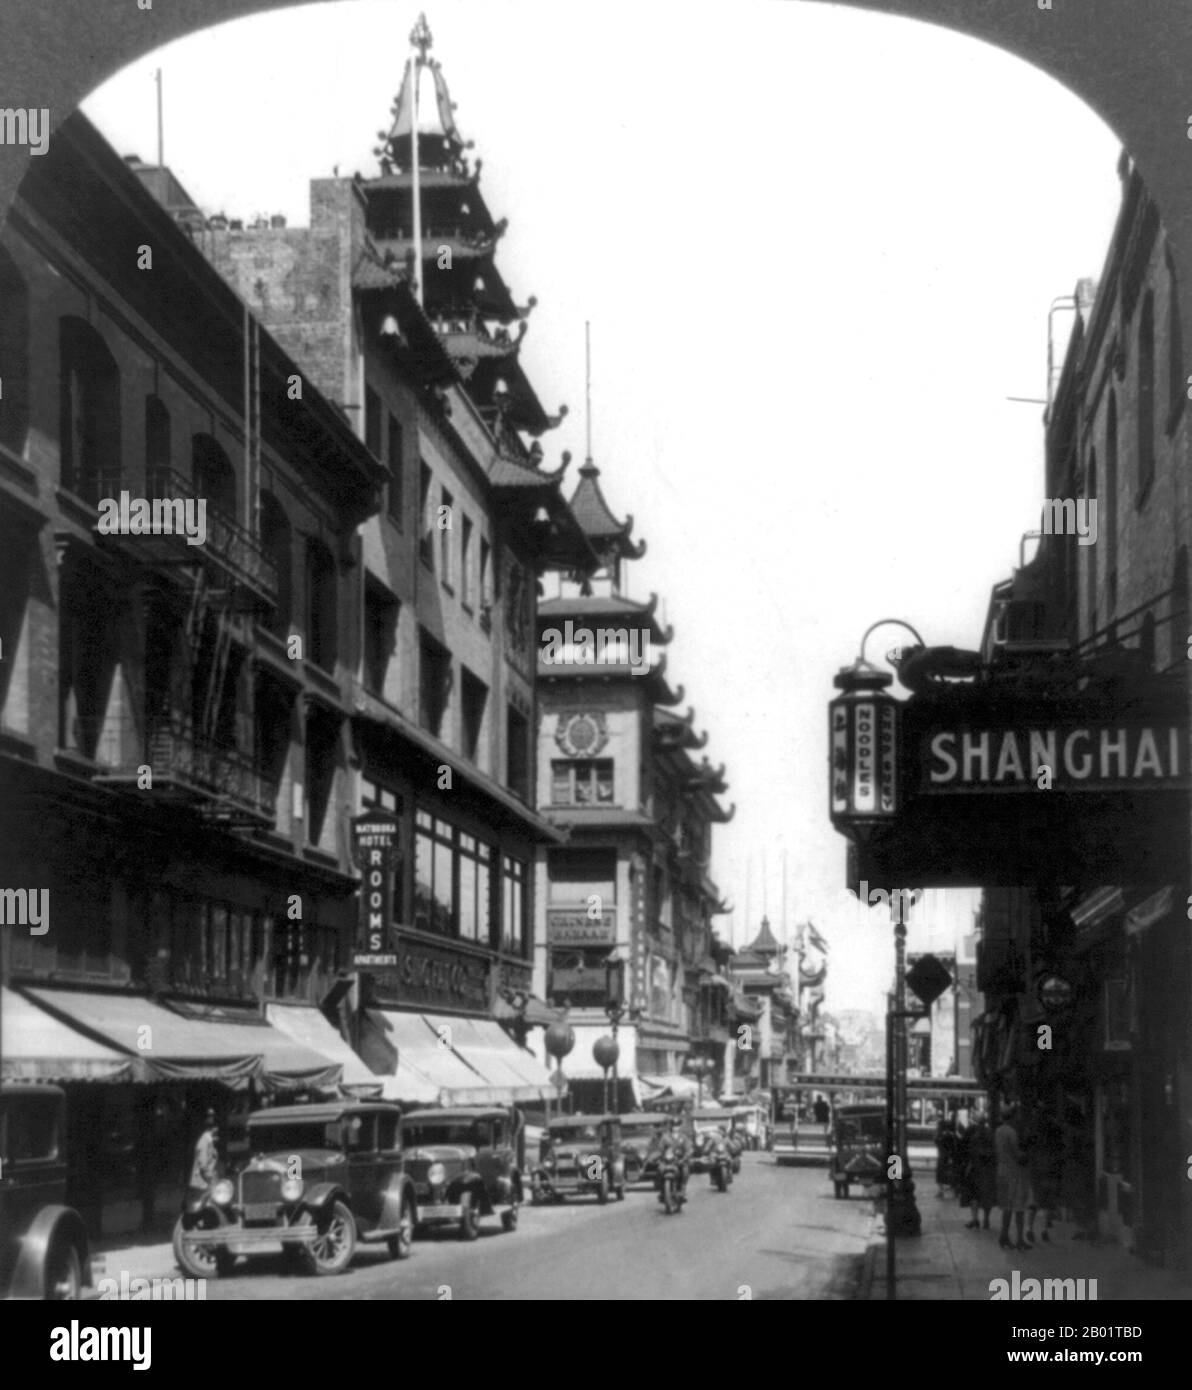 USA: Downtown Chinatown, San Francisco, c. 1929.  San Francisco's Chinatown was the port of entry for early Hoisanese and Zhongshanese Chinese immigrants from the Guangdong province of southern China from the 1850s to the 1900s. The area was the one geographical region deeded by the city government and private property owners which allowed Chinese persons to inherit and inhabit dwellings within the city.  The majority of these Chinese shopkeepers, restaurant owners and hired workers in San Francisco Chinatown were predominantly Hoisanese and male. Stock Photo